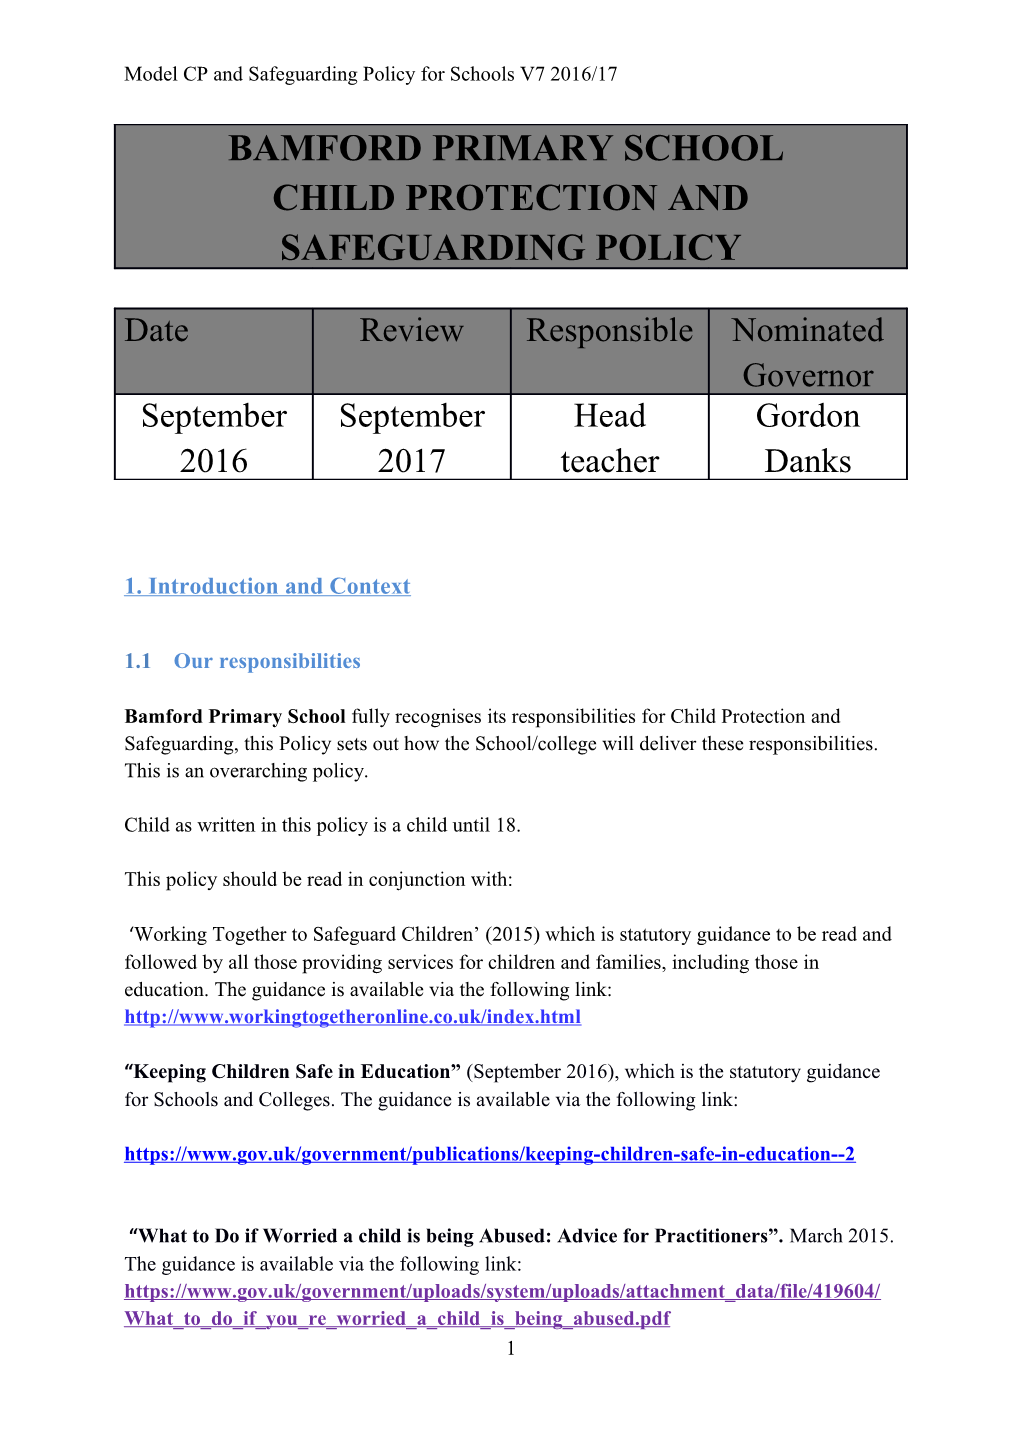 Model SCHOOL CHILD PROTECTION and SAFEGUARDING POLICY s1